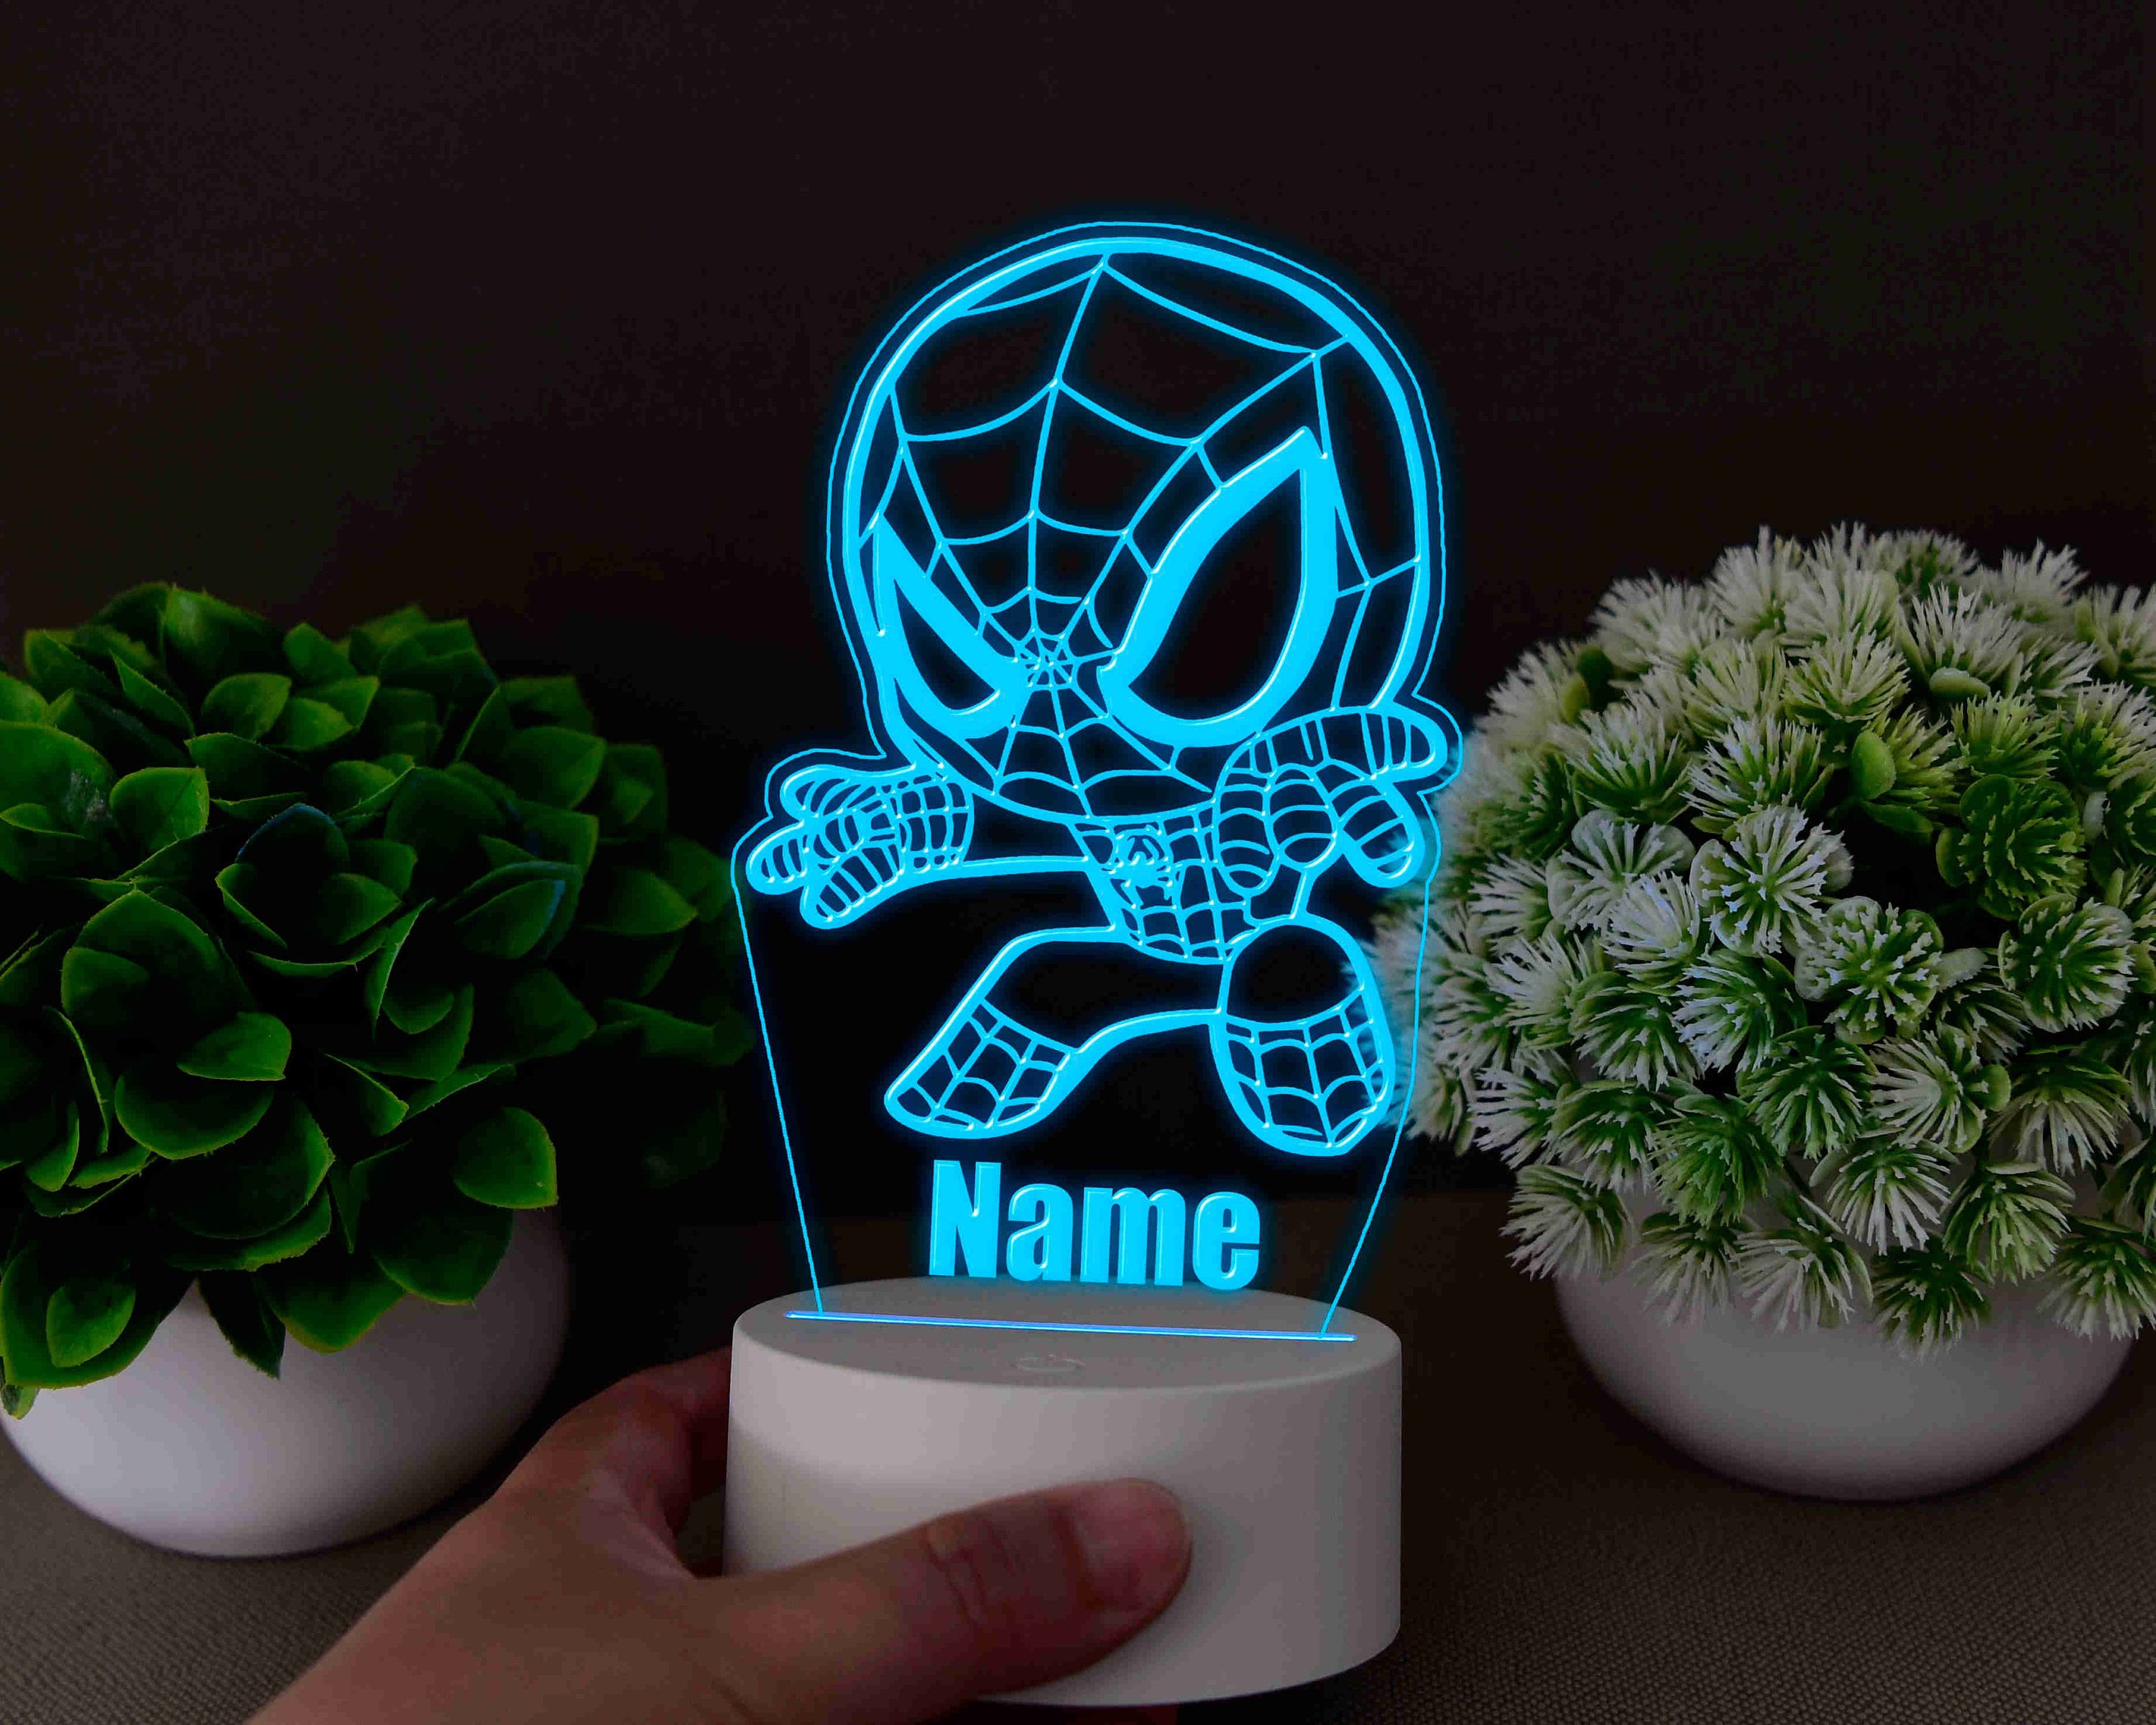 The perfect gift for a Spider-Man obsessed boyfriend #owala #spiderman